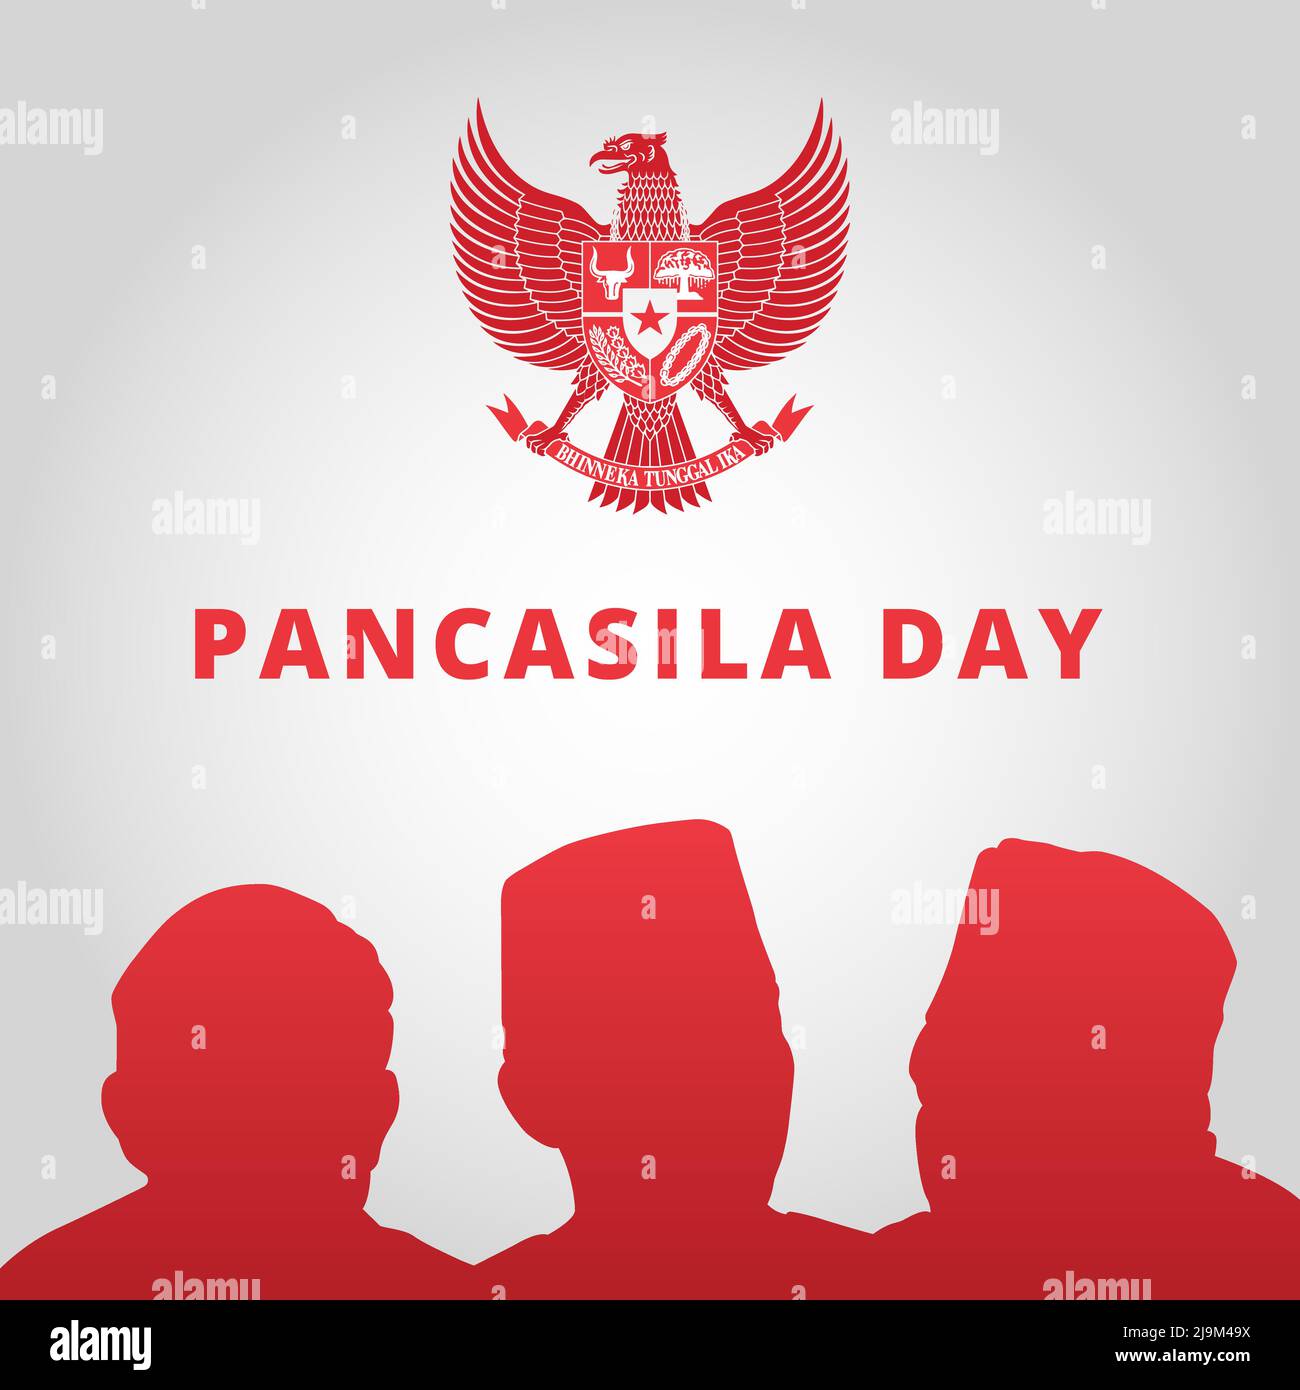 Pancasila Day with Silhouette The Founding Fathers and Symbol Indonesia Garuda Pancasila. Vector Illustration Stock Vector